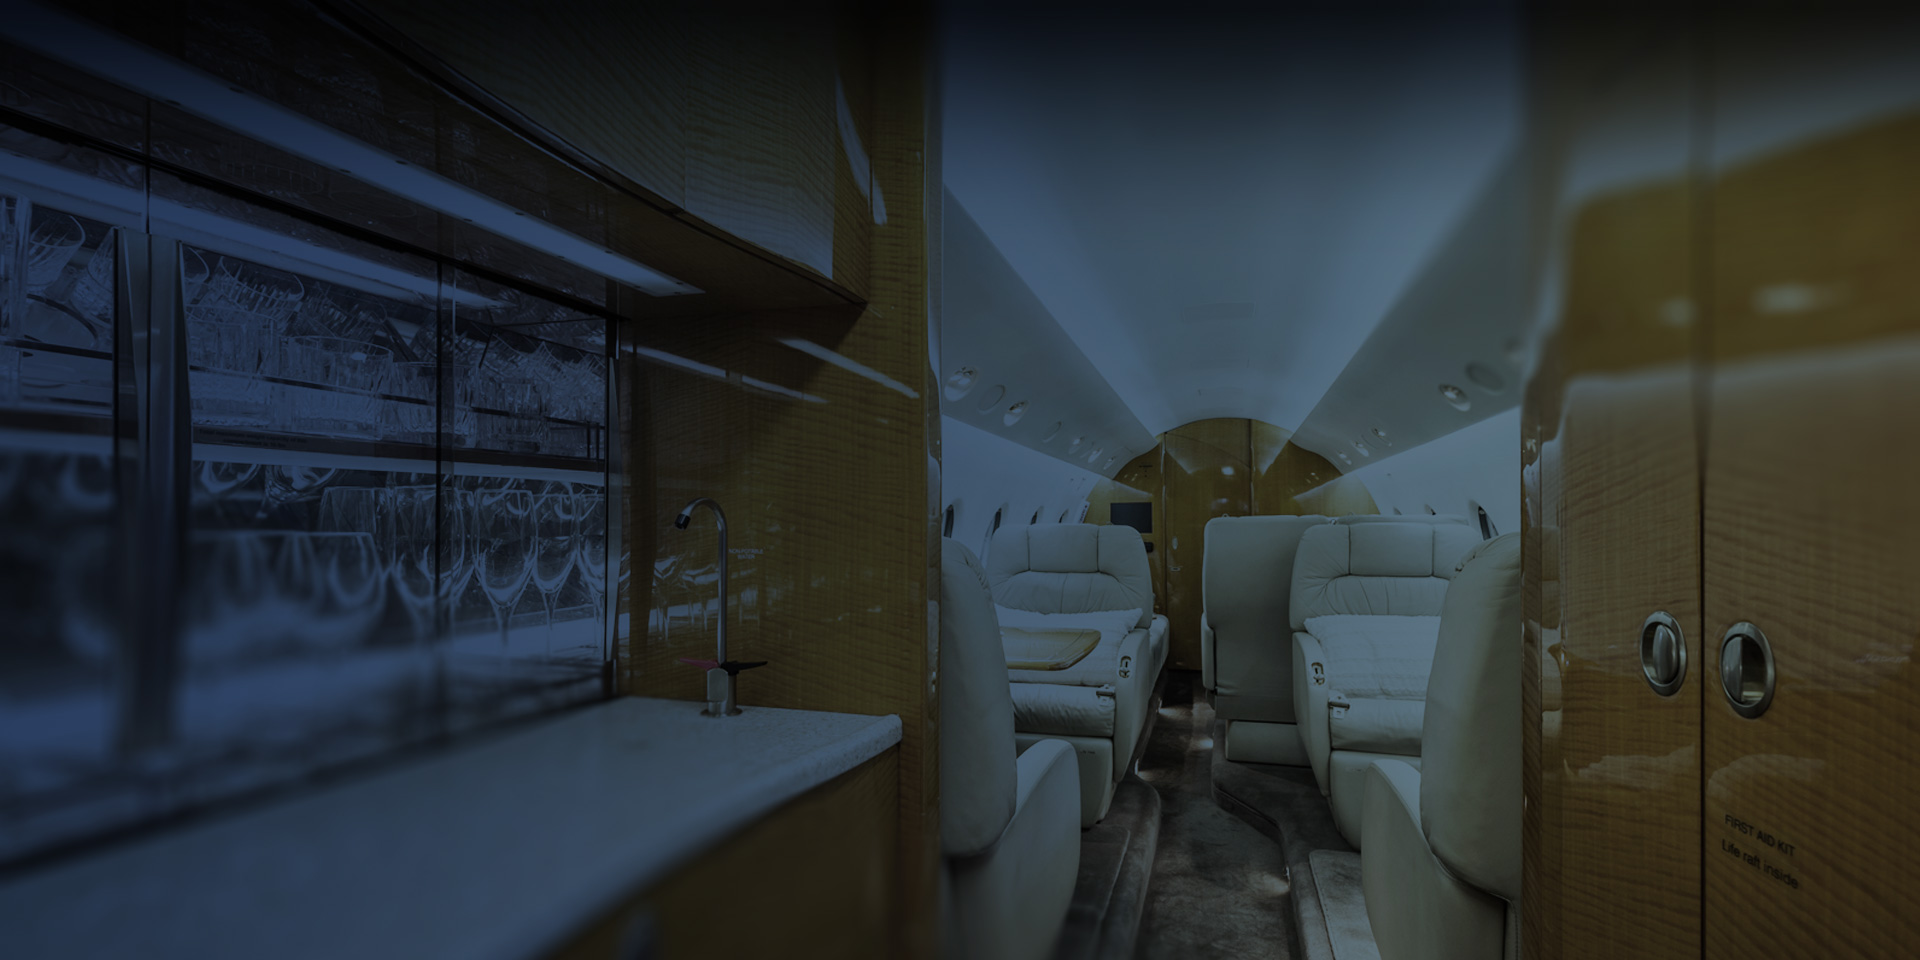 Why Purchasing a Corporate Jet Makes Sense